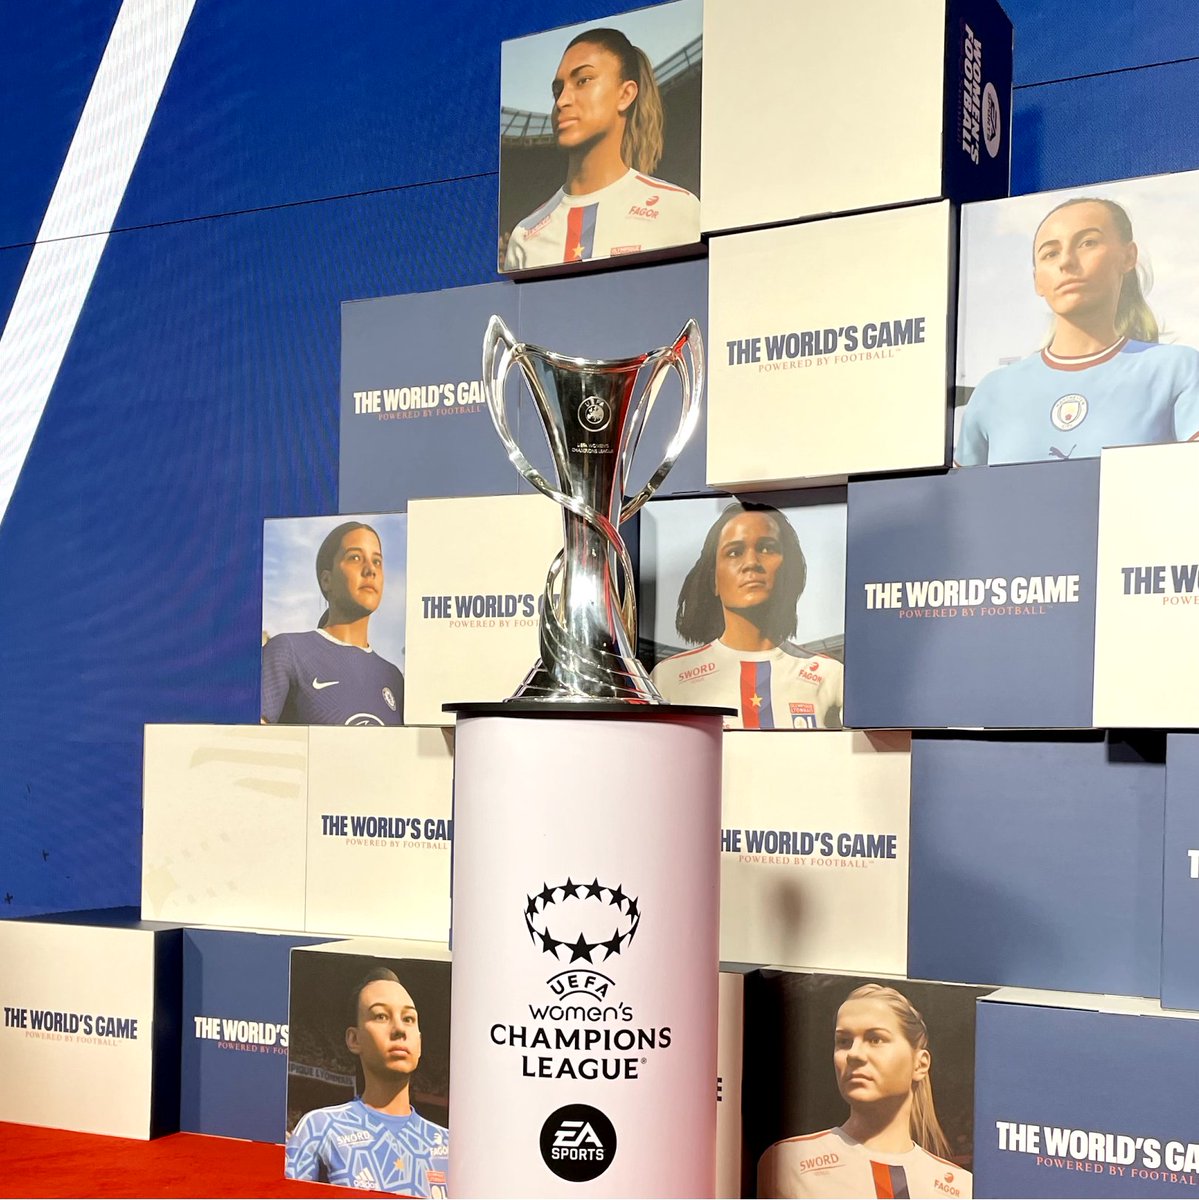 ❗️New competition coming to #FIFA23 @UWCL arrives in early 2023, the next step in Women's Club Football 💪